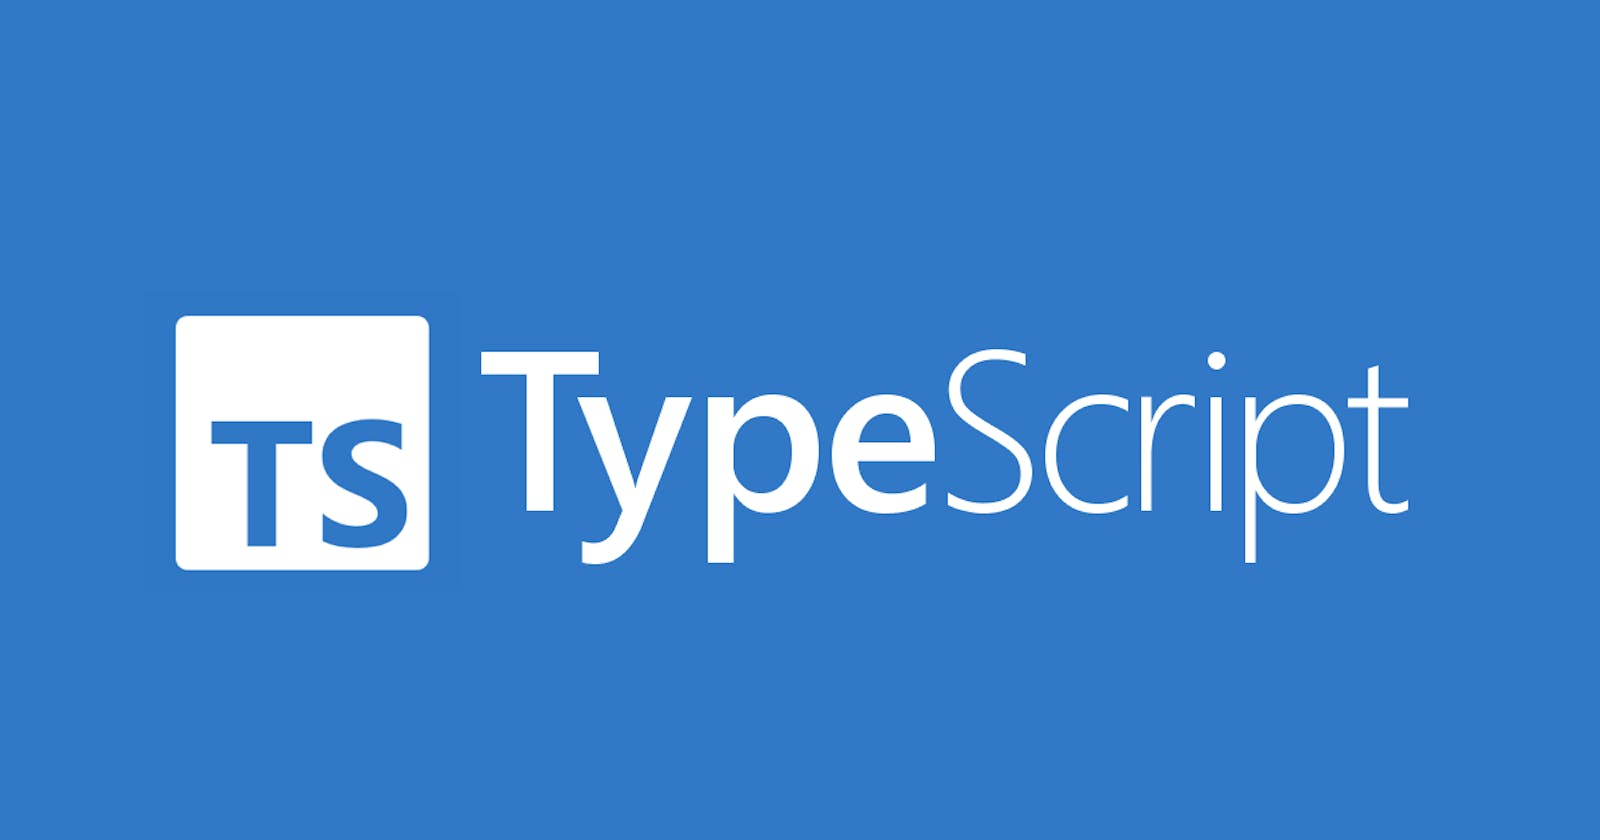 Learning JavaScript? Here's Why You Should Switch To TypeScript As Soon As Possible.